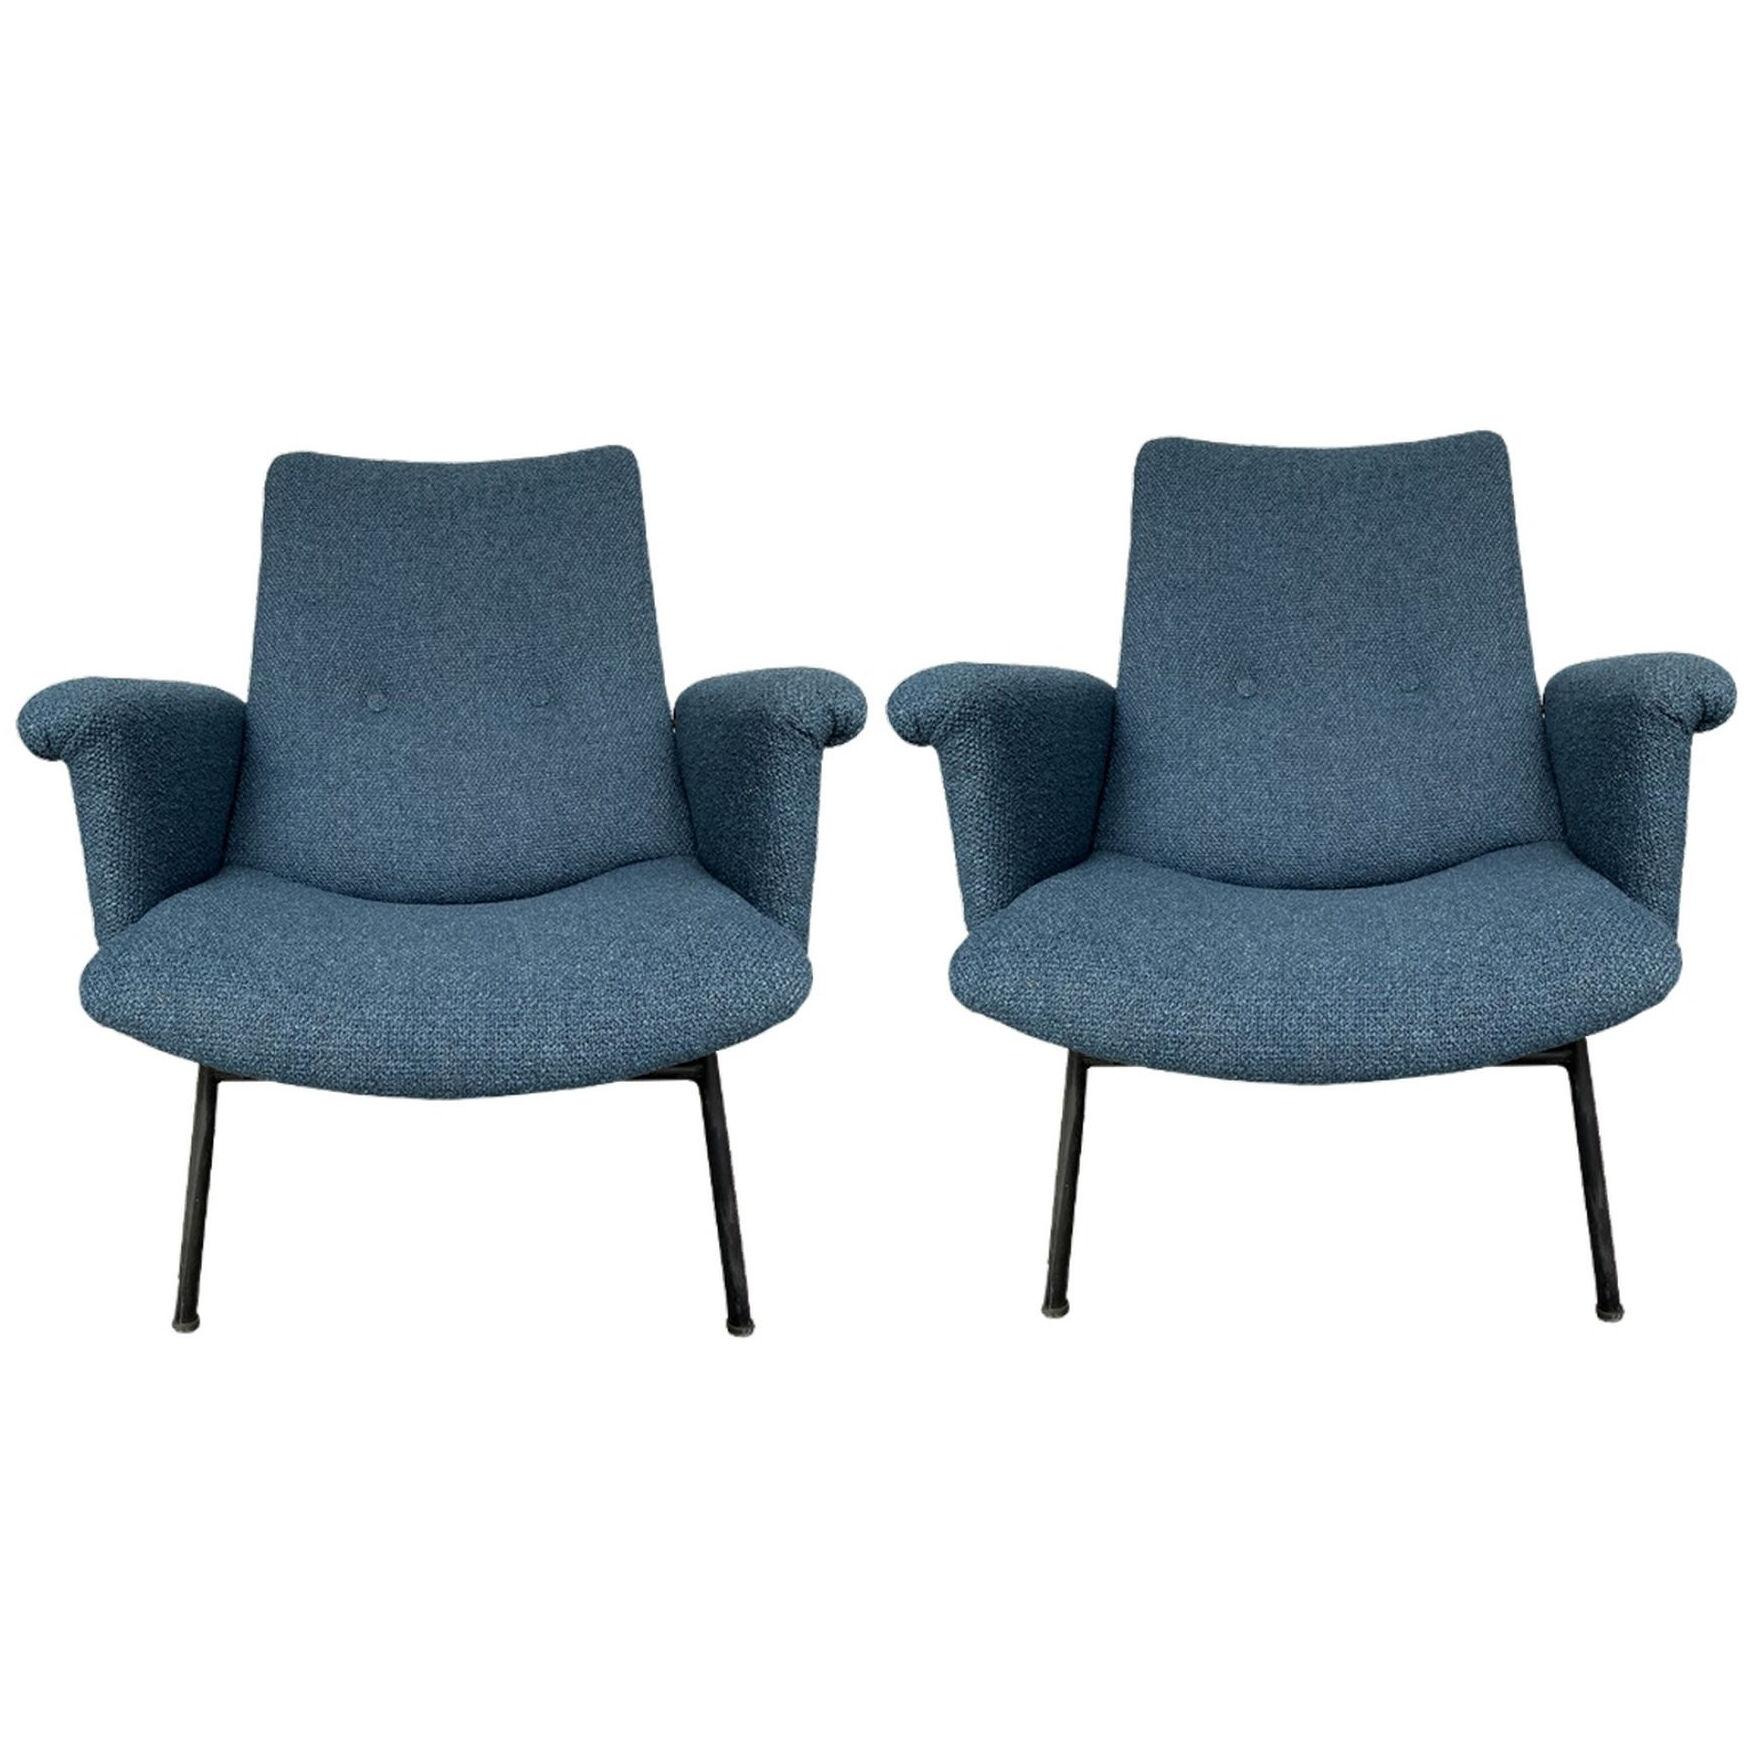 Pair of SK660 armchairs by Pierre Guariche, Steiner Edition, 1953